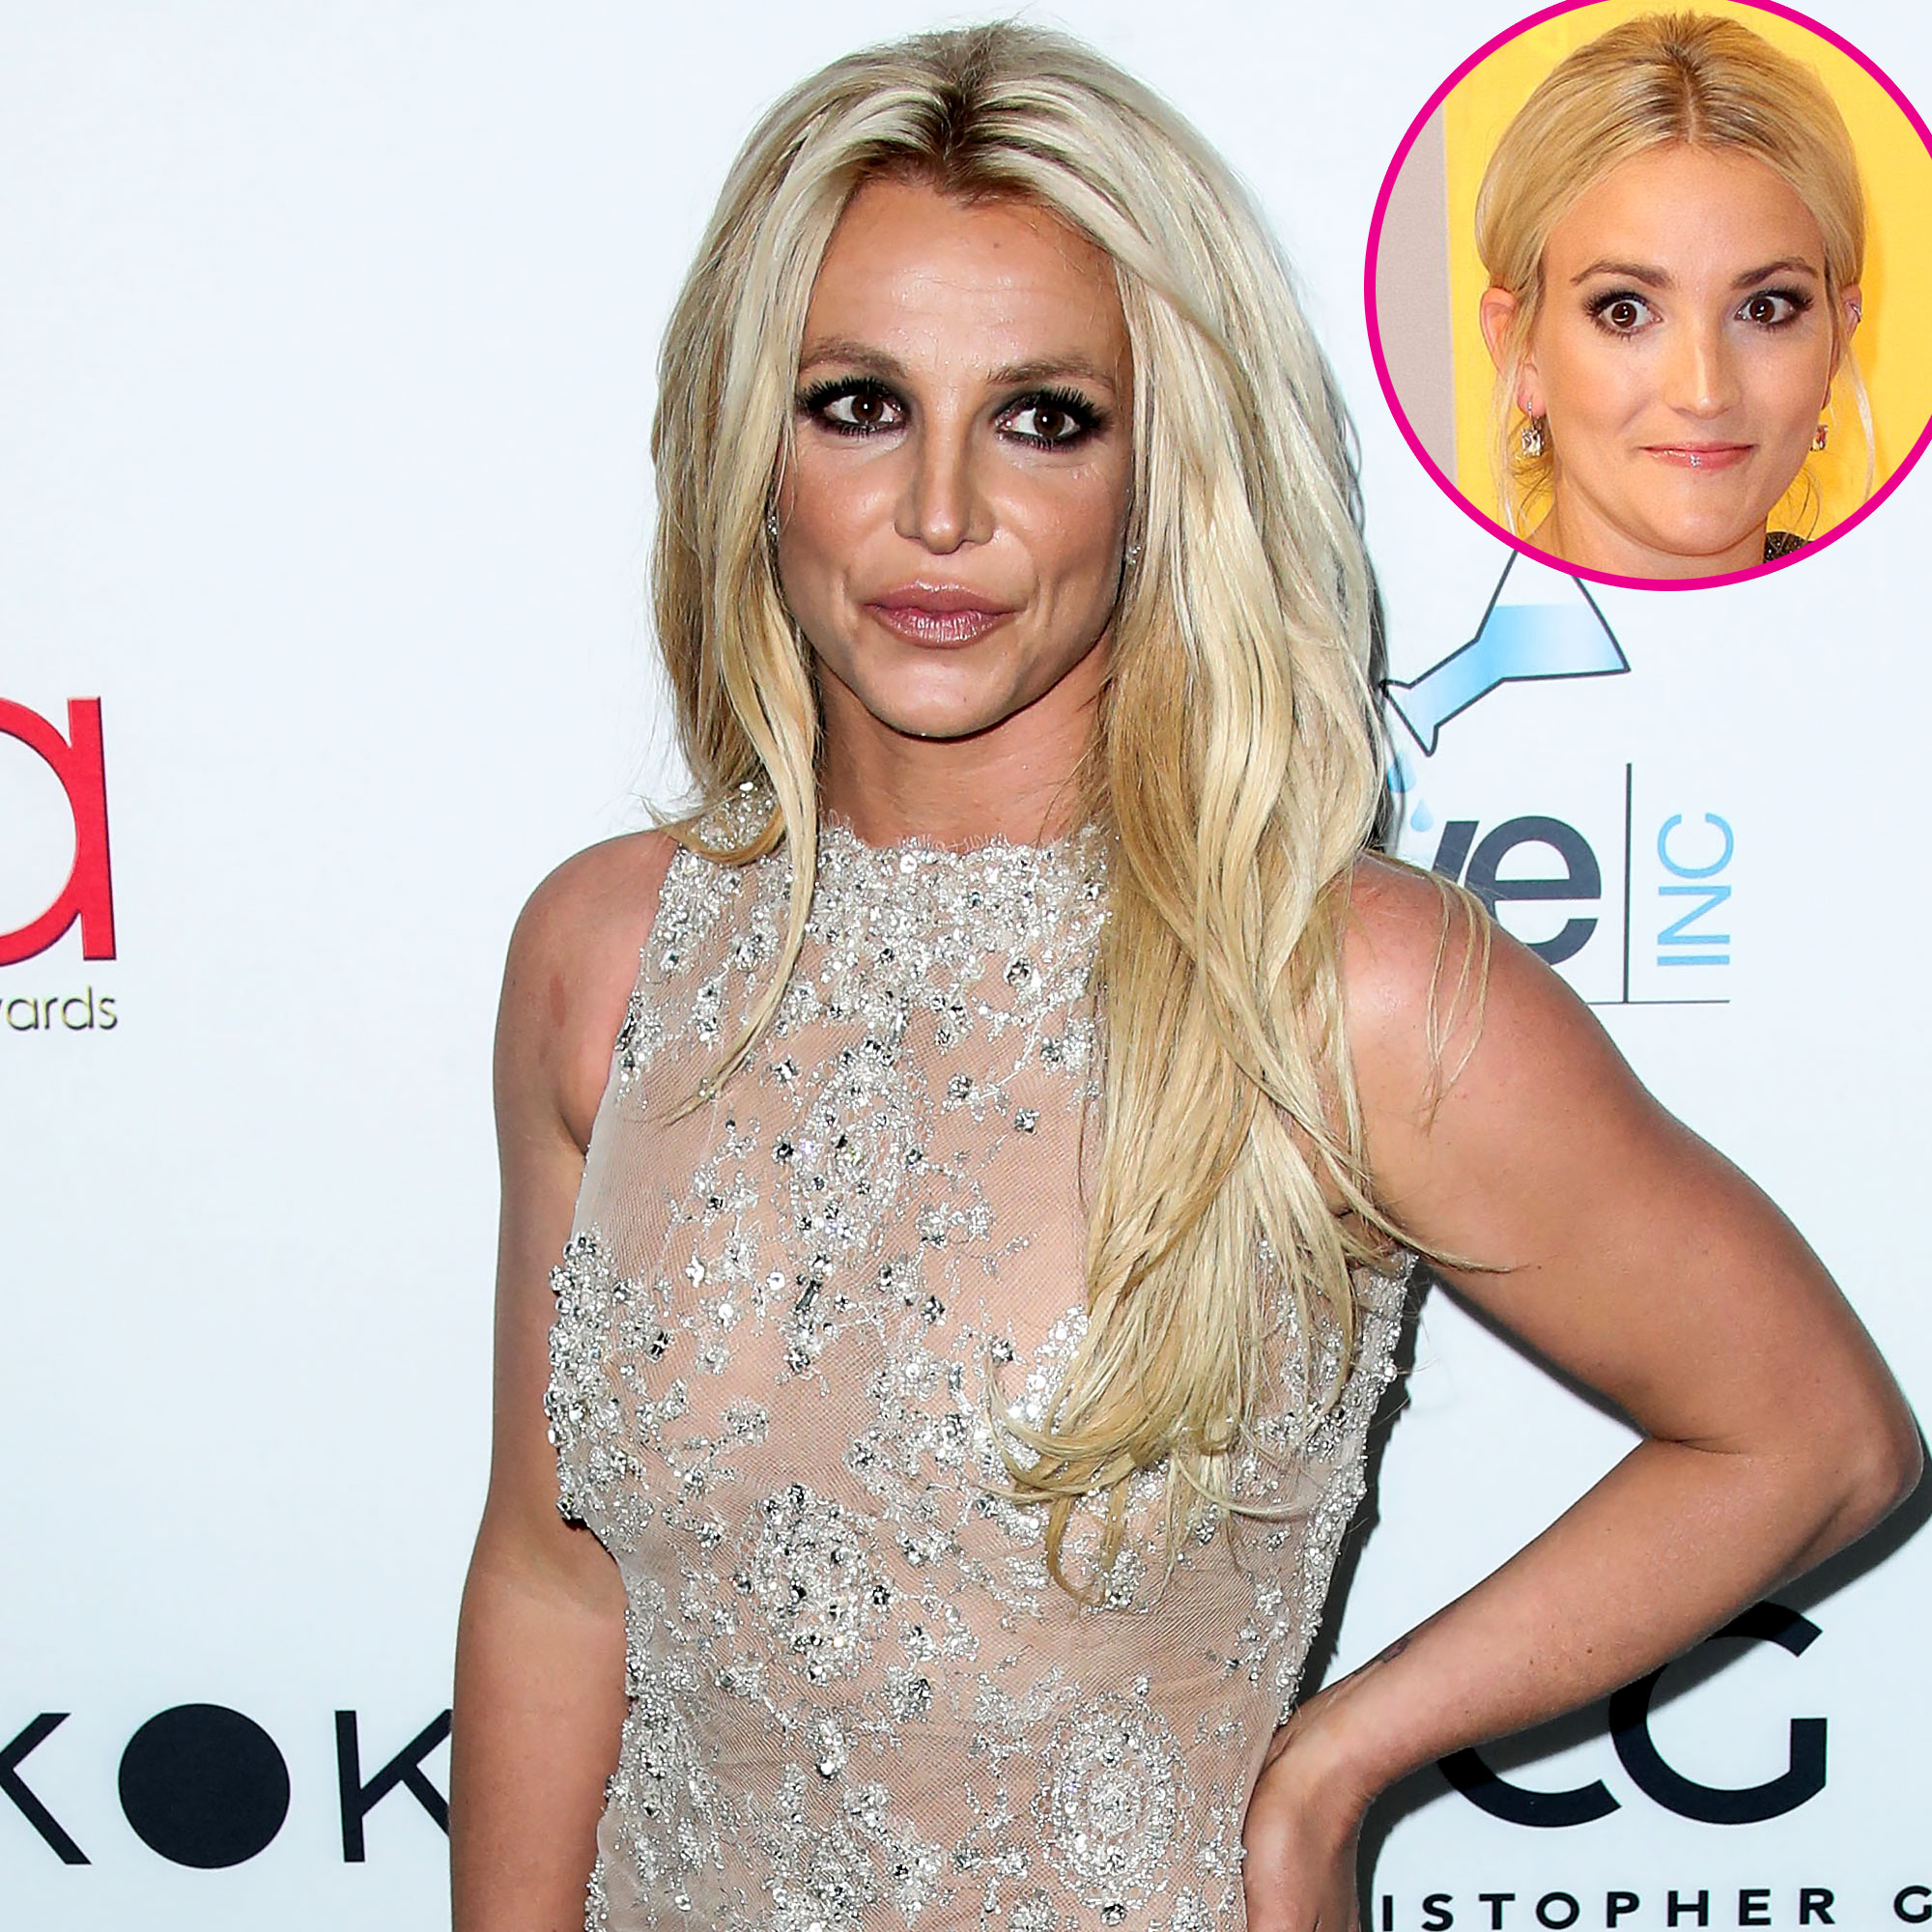 Britney Spears Blowjob - Britney Spears 'Will Hold Nothing Back' in Her Upcoming Book